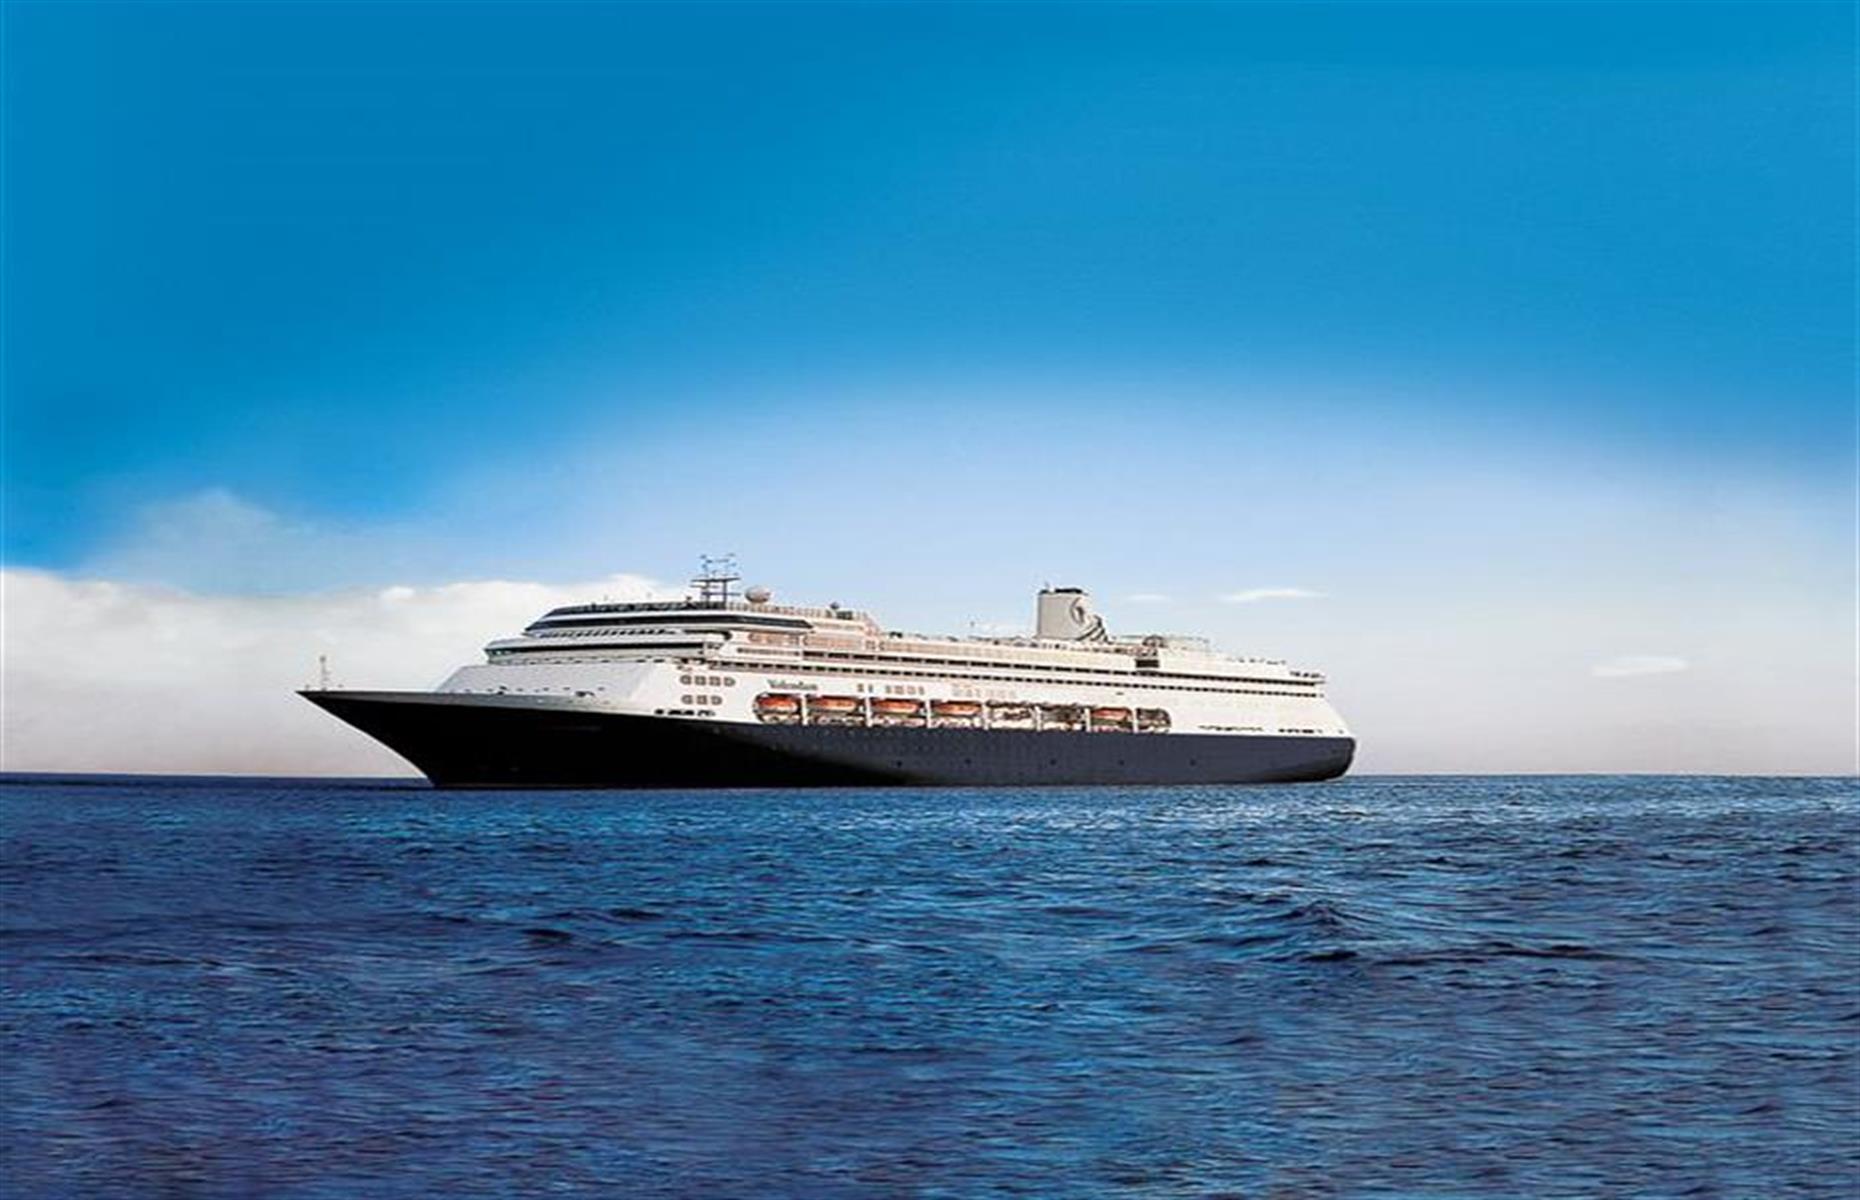 <p>Cruises offer a fantastic way to see the world – not just far-flung destinations but locations closer to home, because of the extra guidance provided by onboard experts, the excursions to remote areas and the new perspectives you'll experience when combining multiple destinations. If your bucket list features a cruise or two but you're not quite sure of the destination you'd visit first, don't panic – we've rounded up 15 fantastic once-in-a-lifetime trips that fit the bill.</p>  <p><strong>Click through to see our pick of 15 of the best bucket-list cruises around the world, from opera in Italy to penguins in Antarctica...</strong></p>